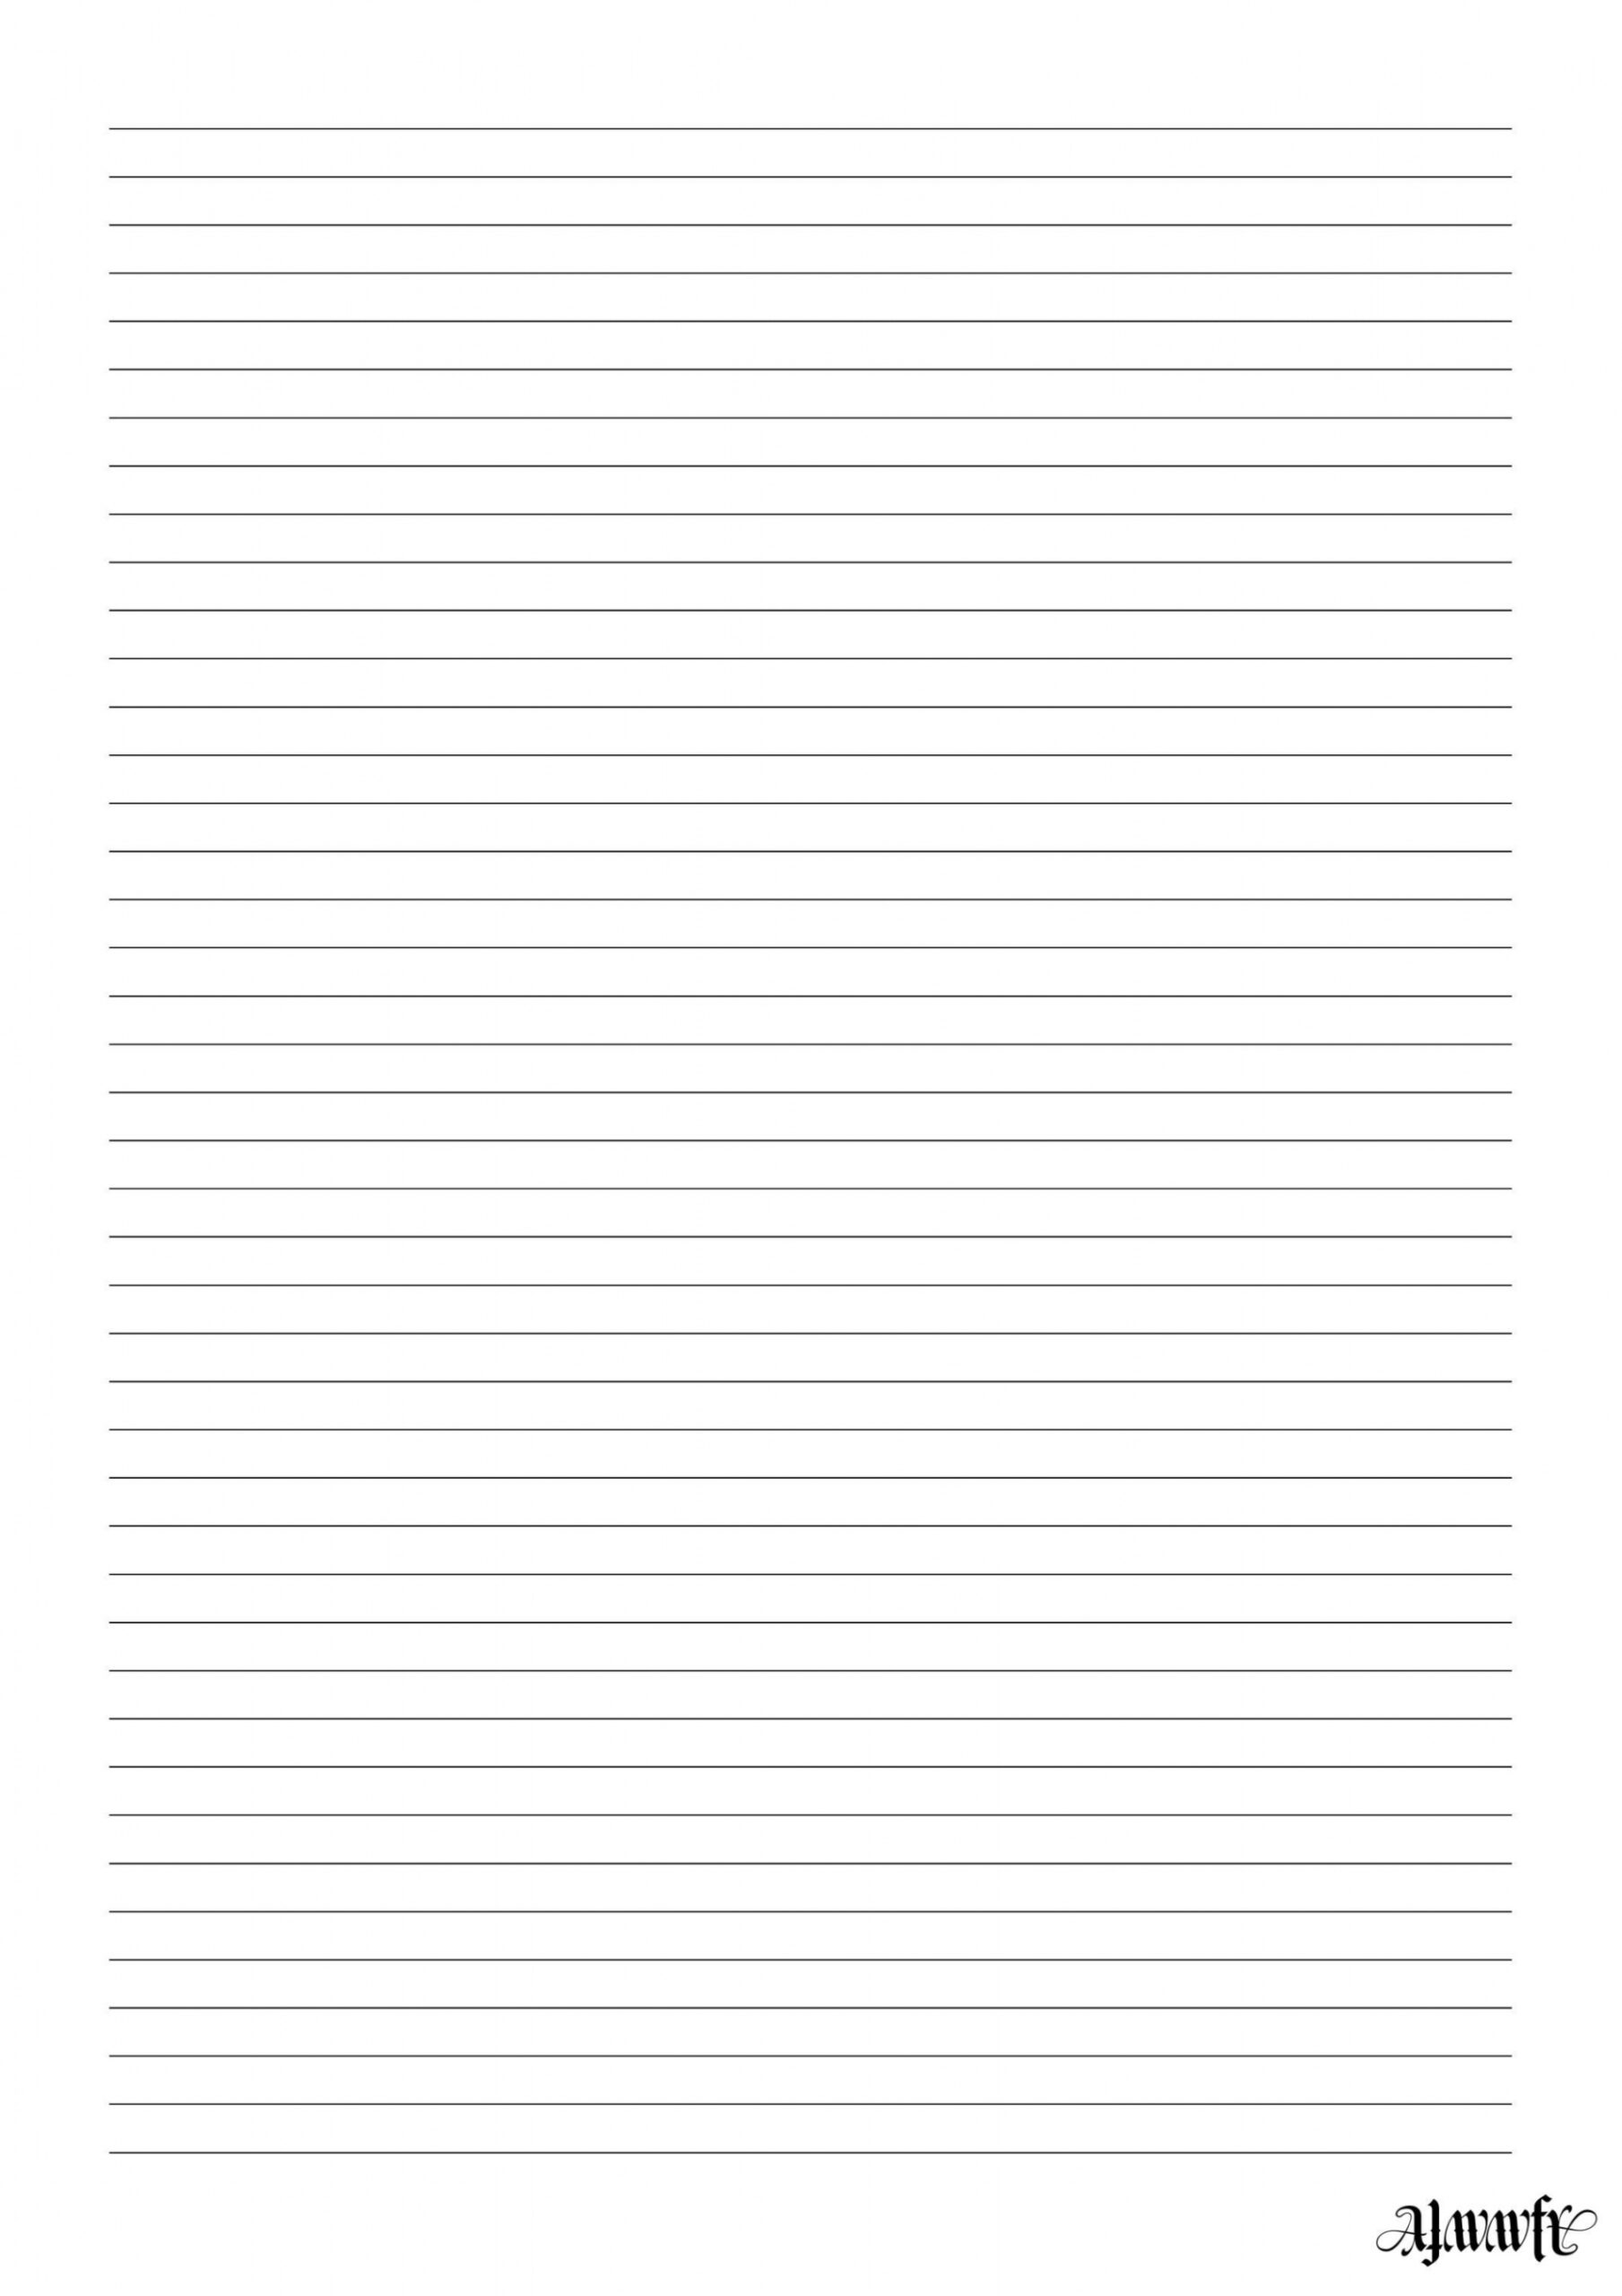 Lined Printable A paper, letter writing, personal use only - Printable Paper